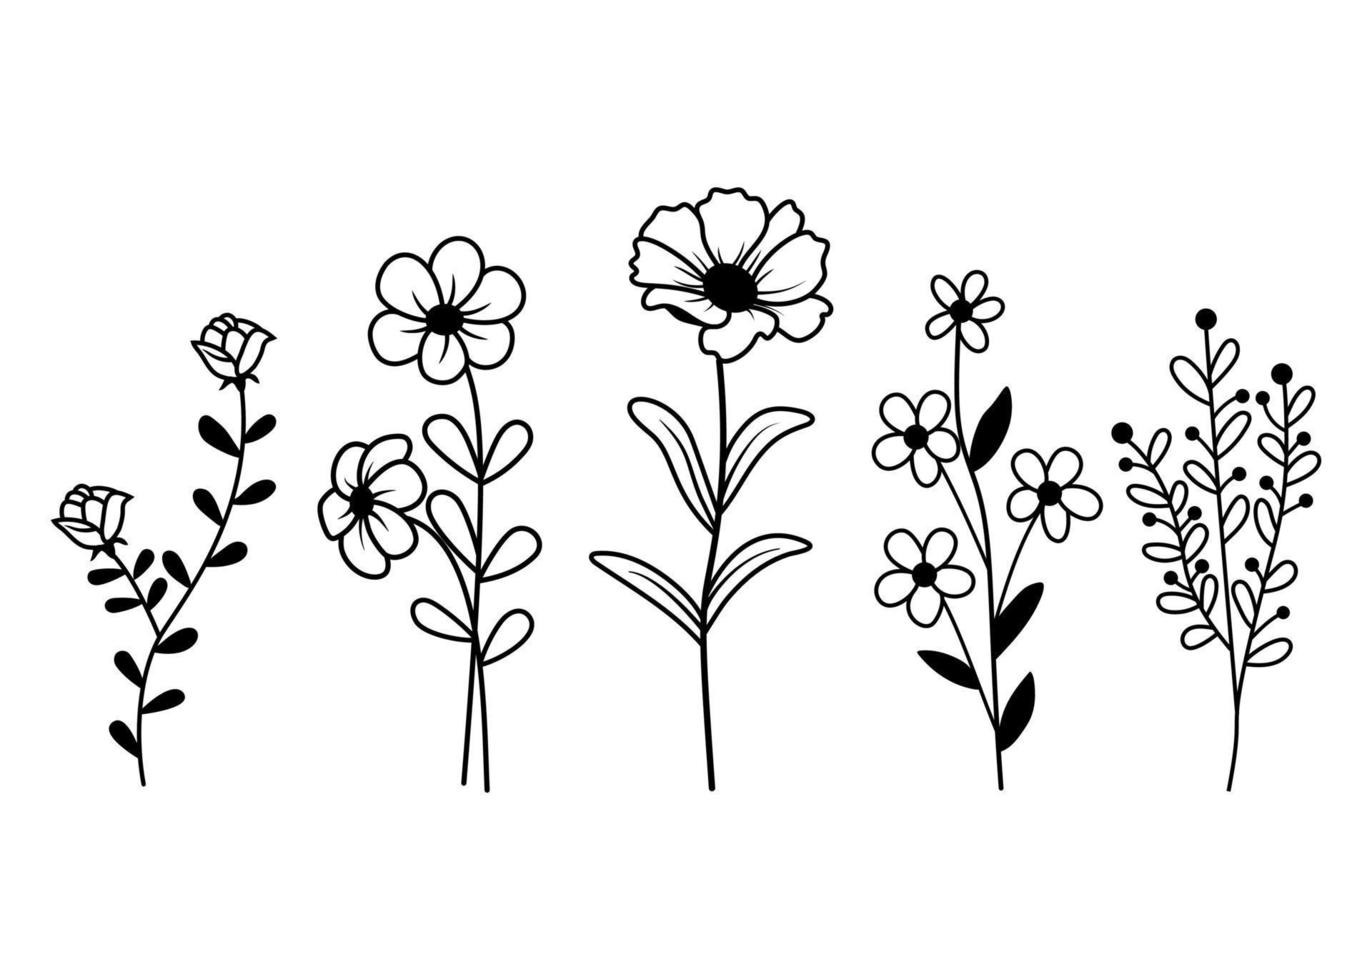 Hand Drawn Wildflowers Vector Collection minimalist style vector illustration isolated on white